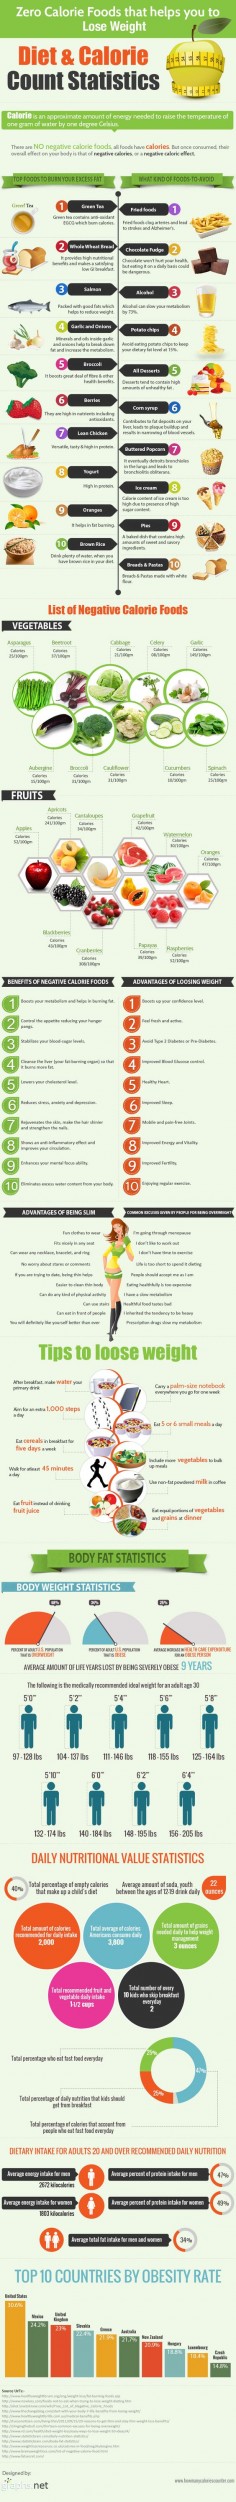 Lose Weight With These #ZeroCalorie Foods | #Infographic